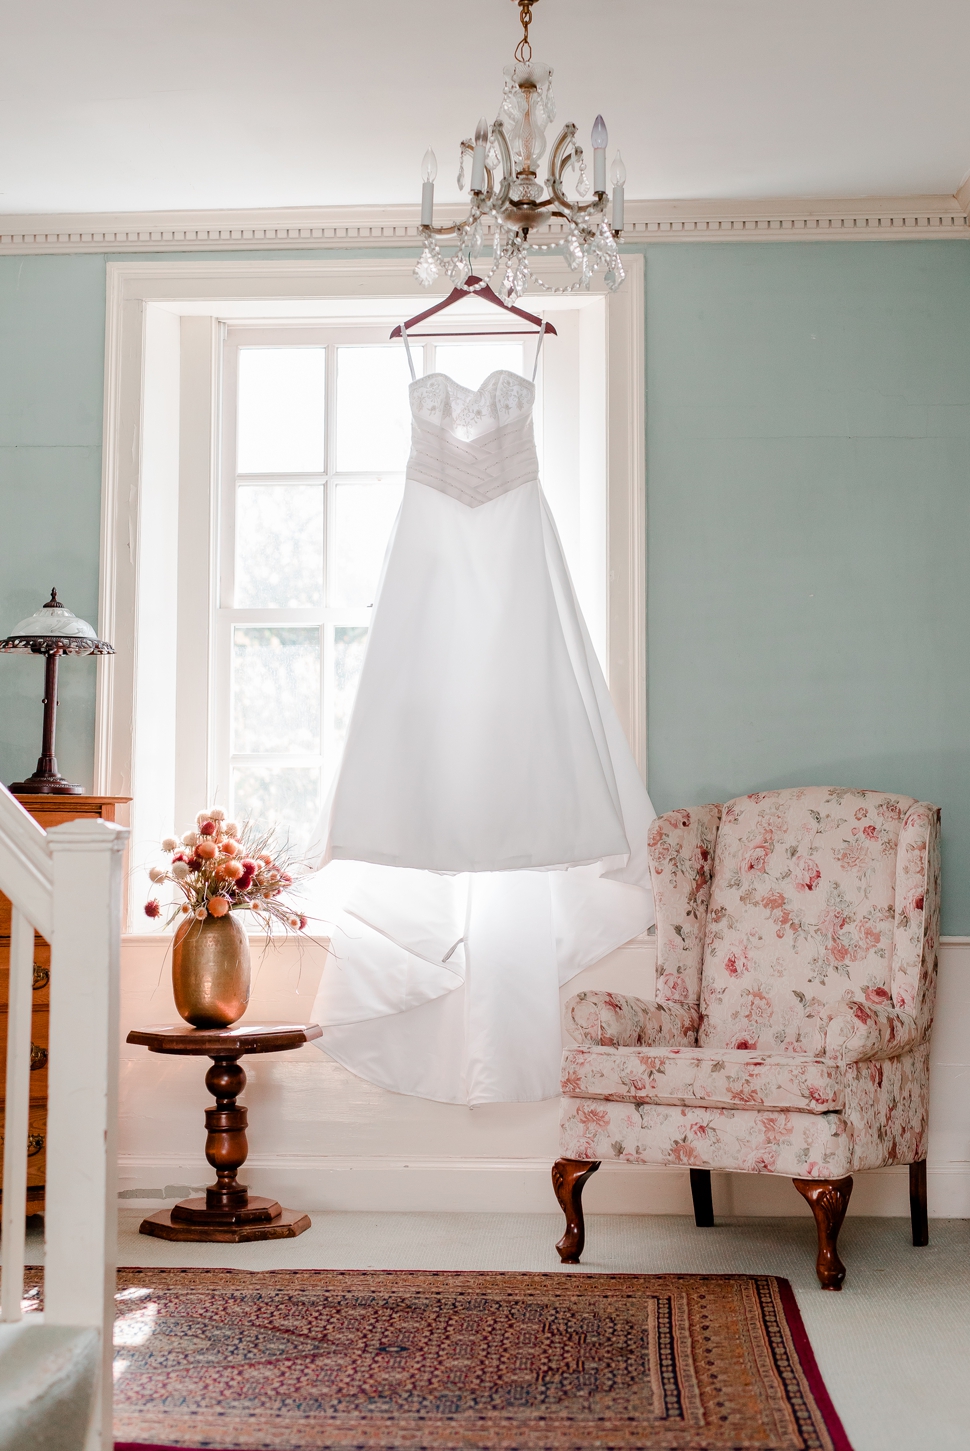 wedding dress hanging up in bridal suite next to vintage chair at the Grand View Inn Resort, Jaffrey NH